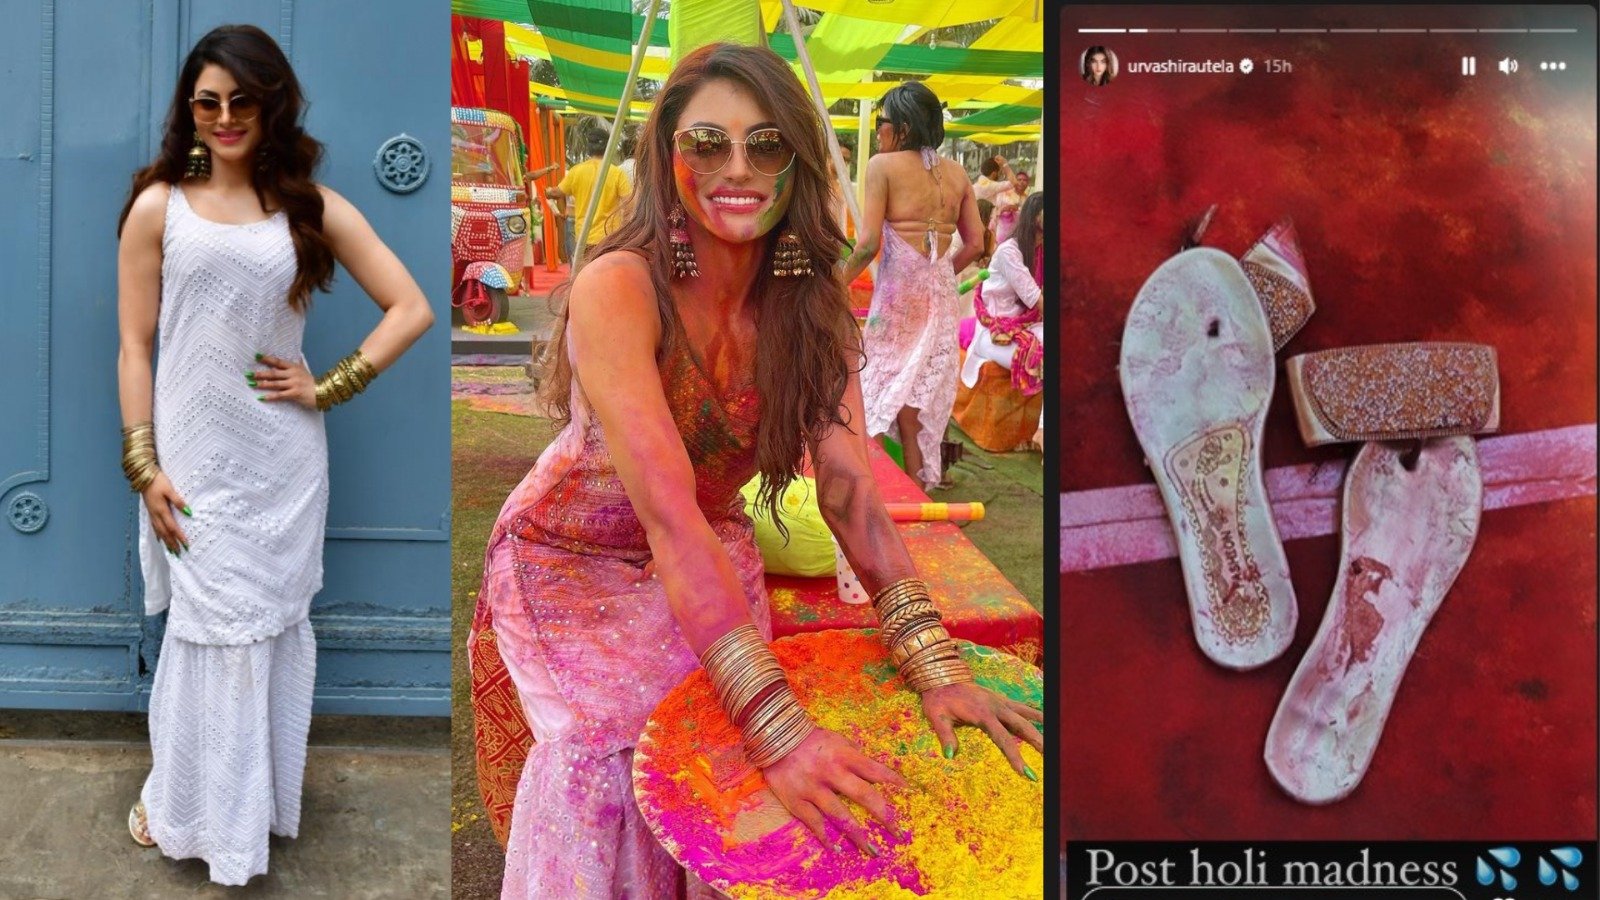 Urvashi Rautela Had The Best Holi Of Her Life, Grooves On ‘Aakh Mare’, In Excitement Breaks Her Sandals